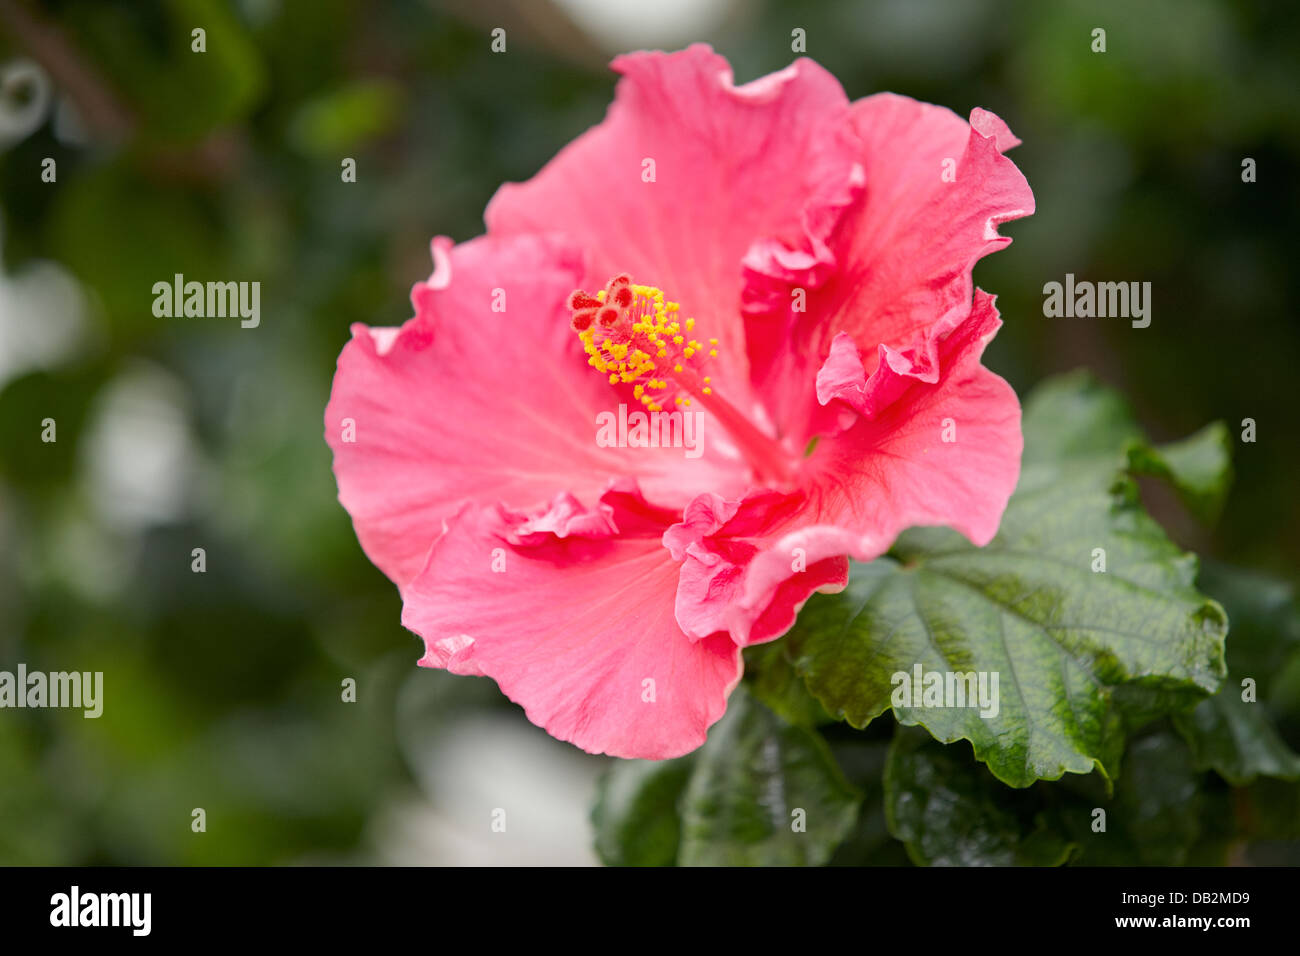 Hibiscus flower. Scientific name: Hibiscus rosa-sinensis. Gardens by the Bay, Singapore. Stock Photo